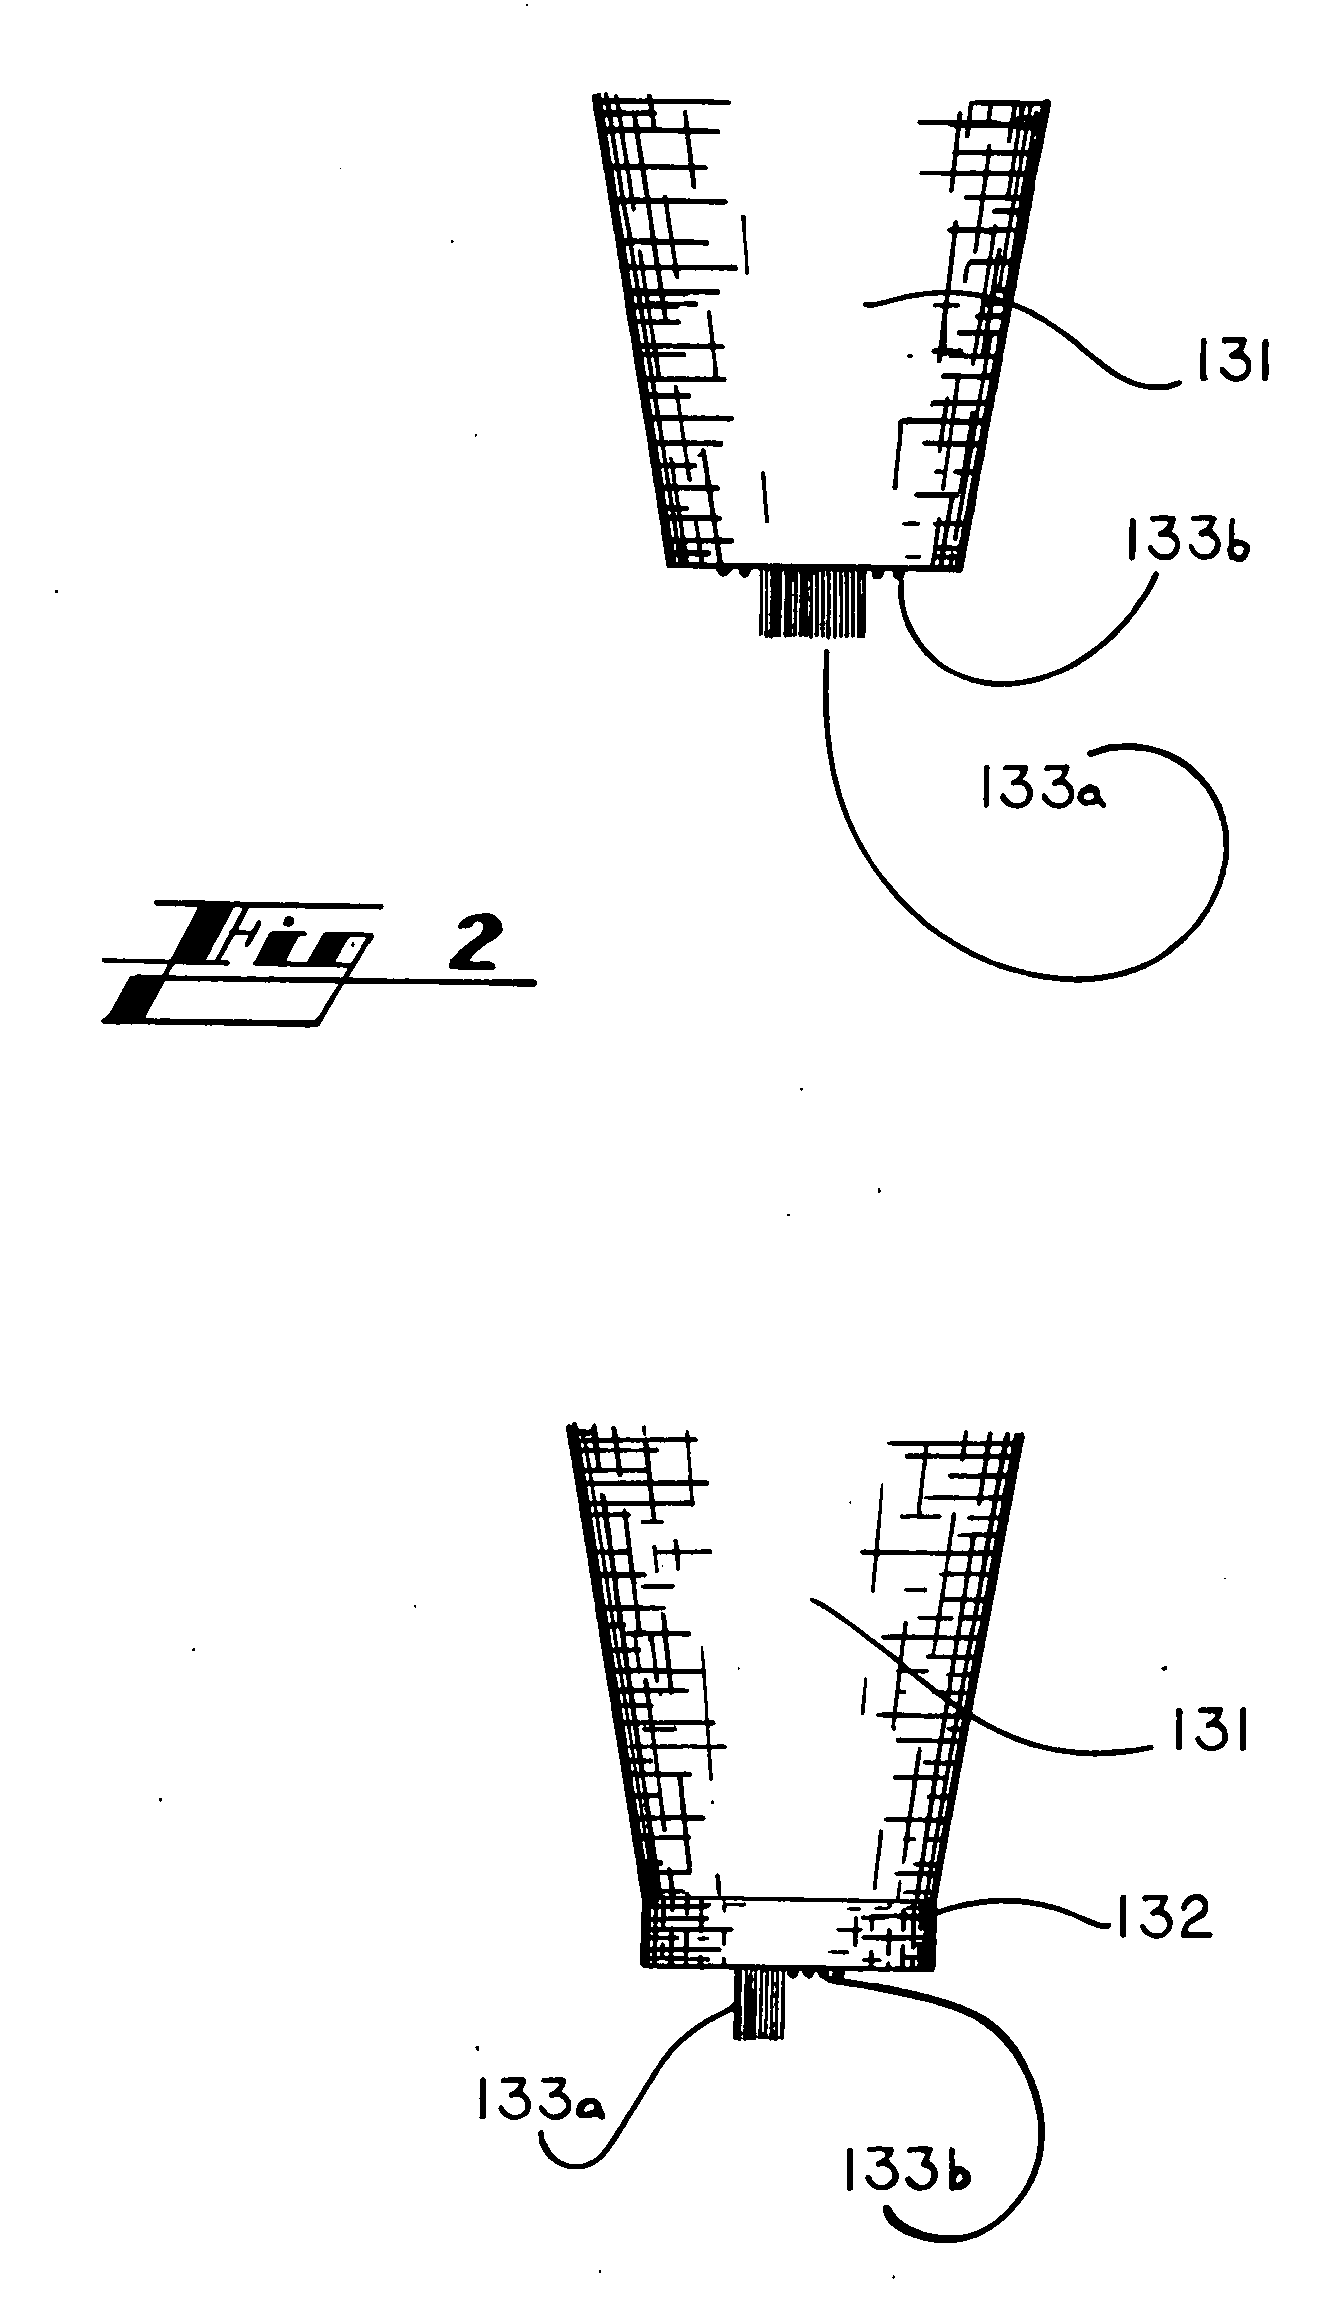 System and method for manufacturing carbon nanotubes